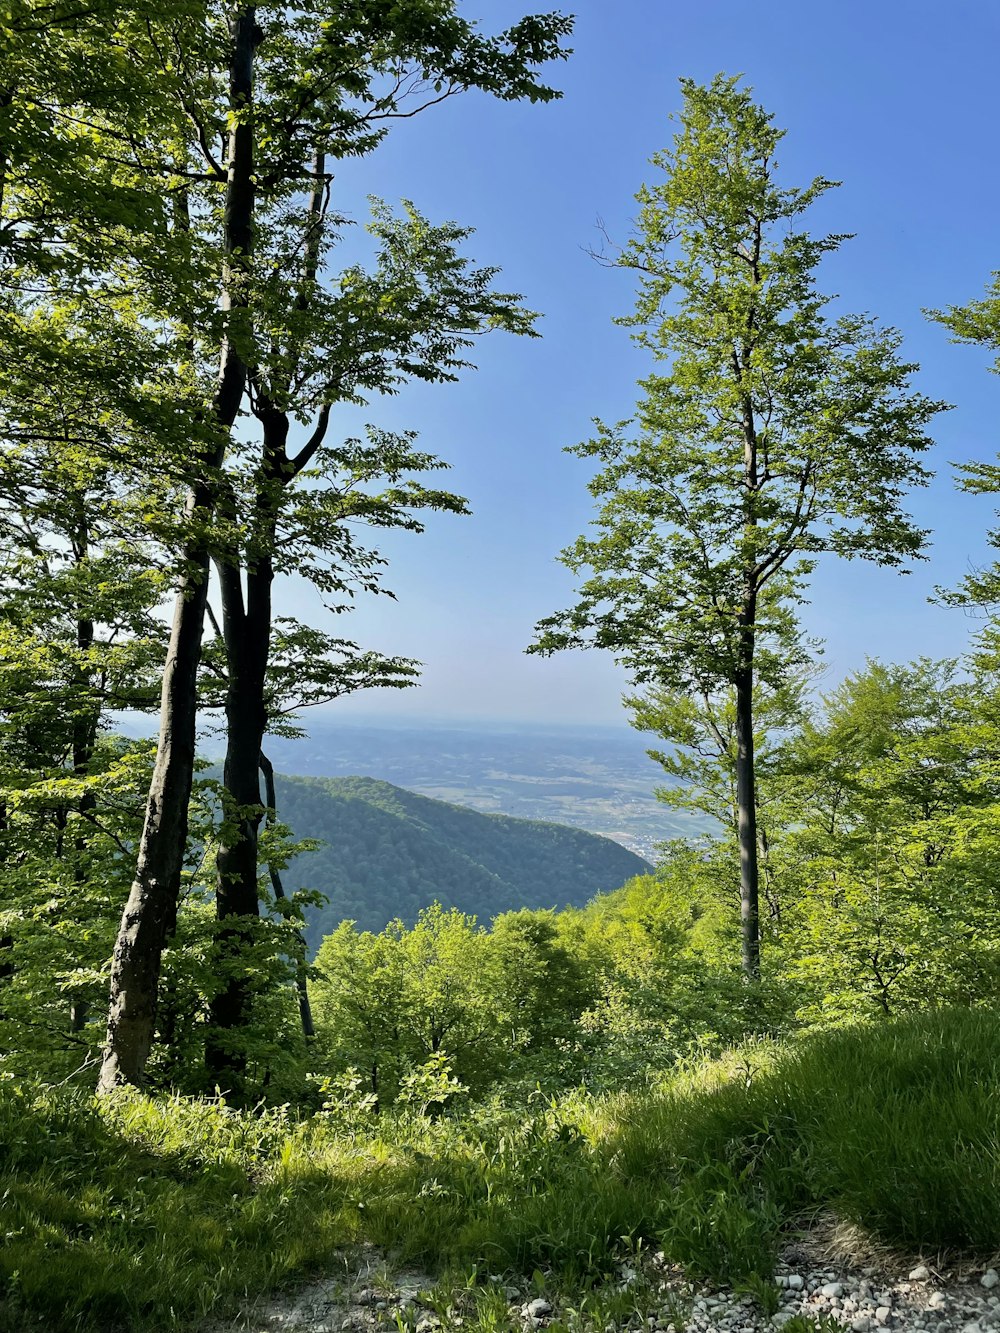 a scenic view of the mountains and trees